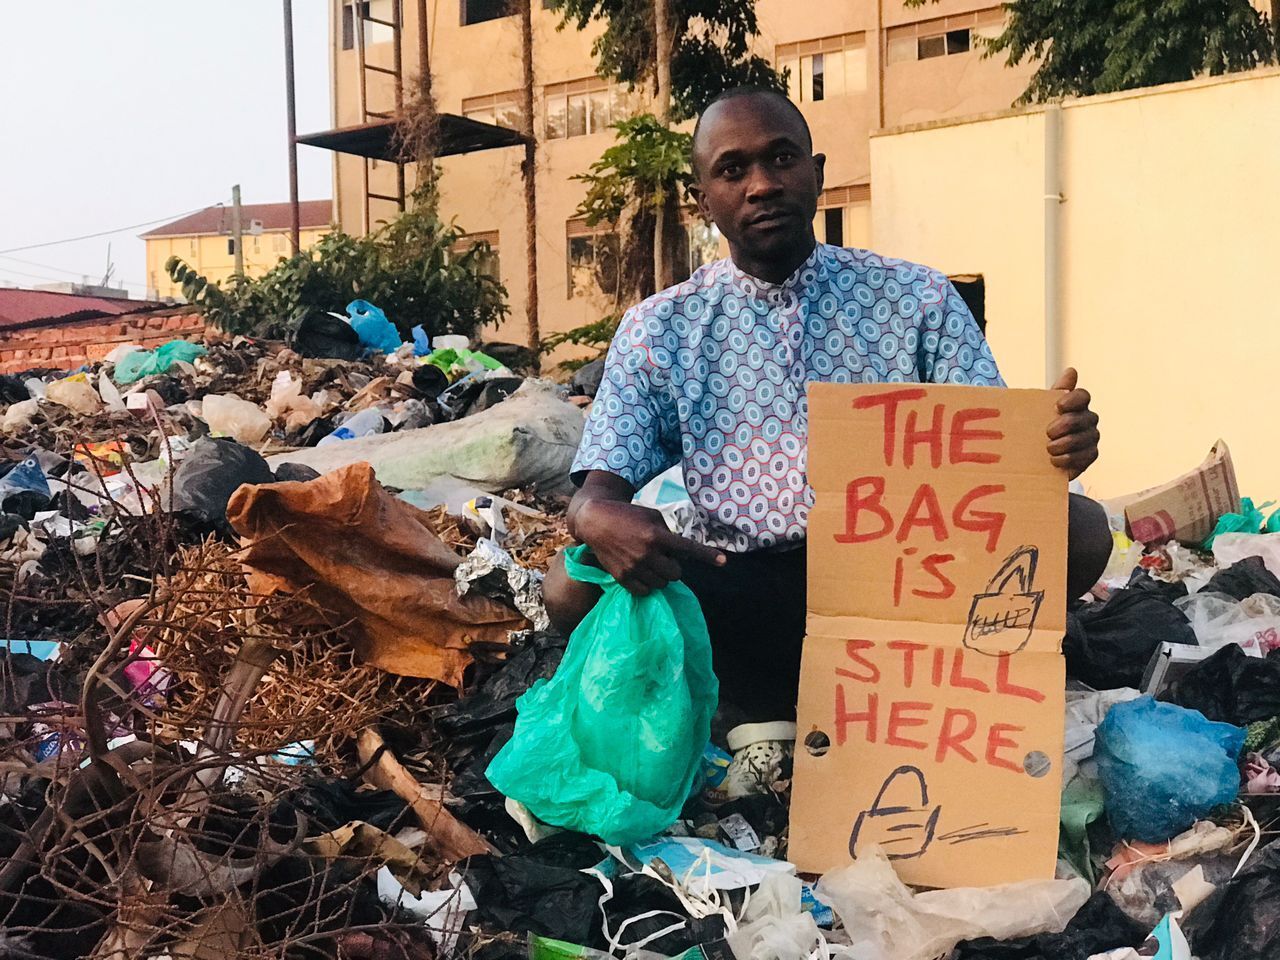 Nirere Sadrach from End Plastic Pollution, Uganda standing outside amidst a pile of plastic waste, holding a sign that says “THE BAG IS STILL HERE“